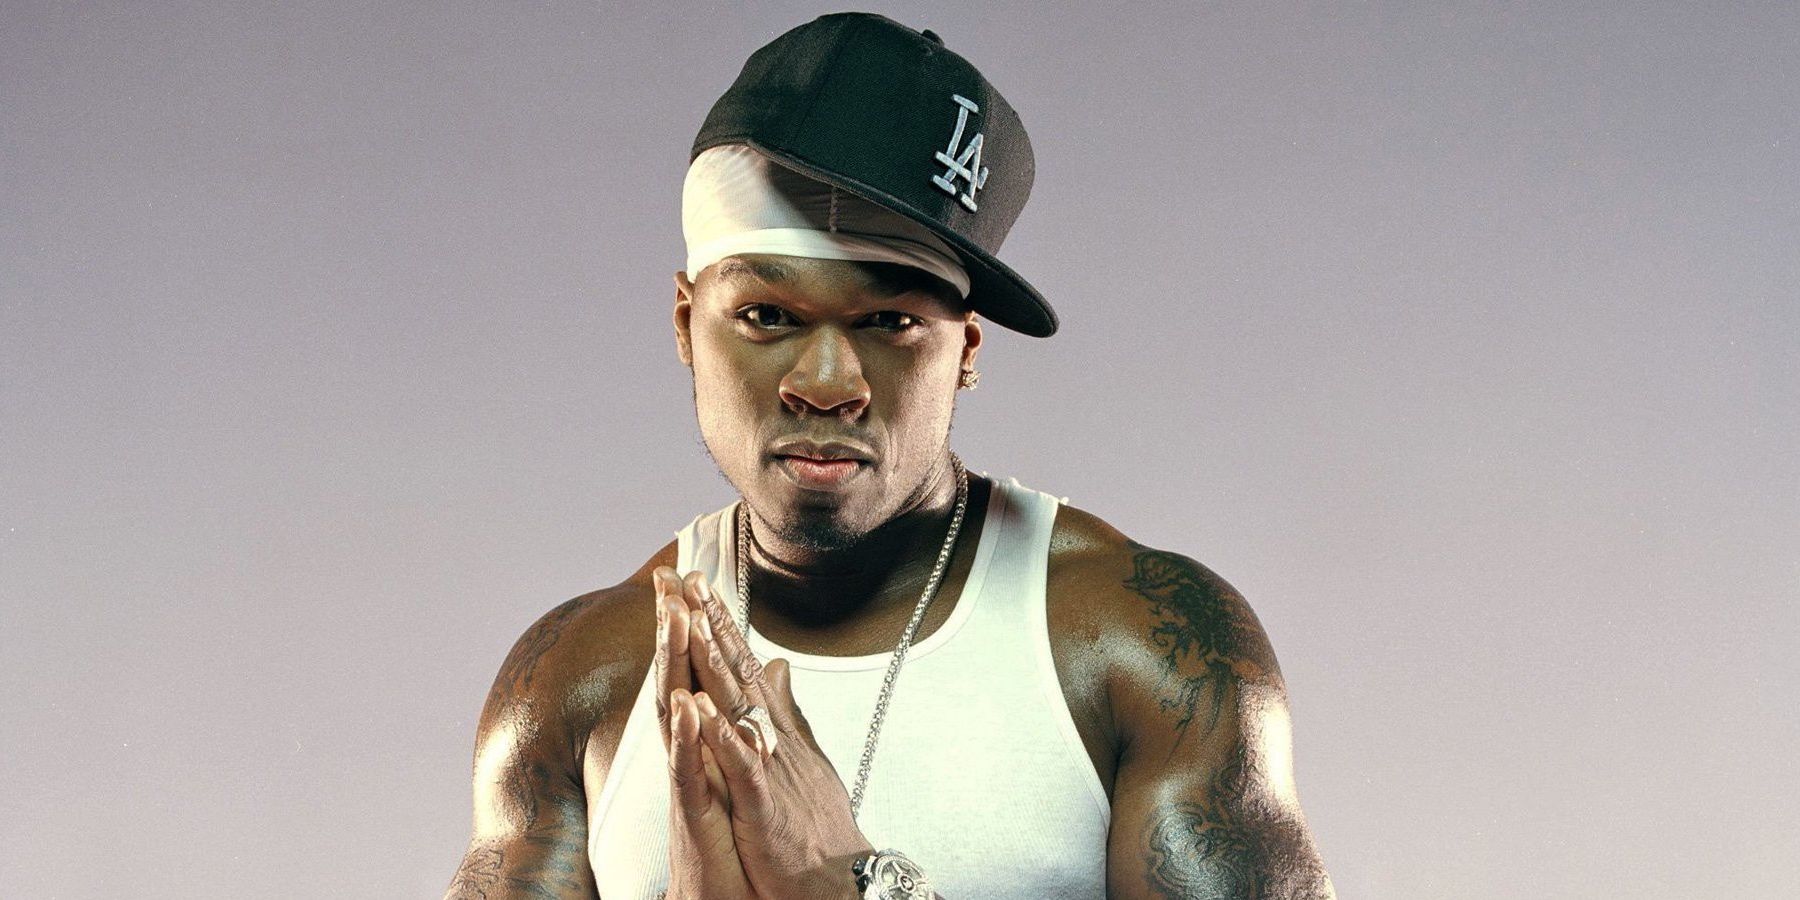 50 Cent Threatens to Fight Nick Cannon Over Eminem Feud